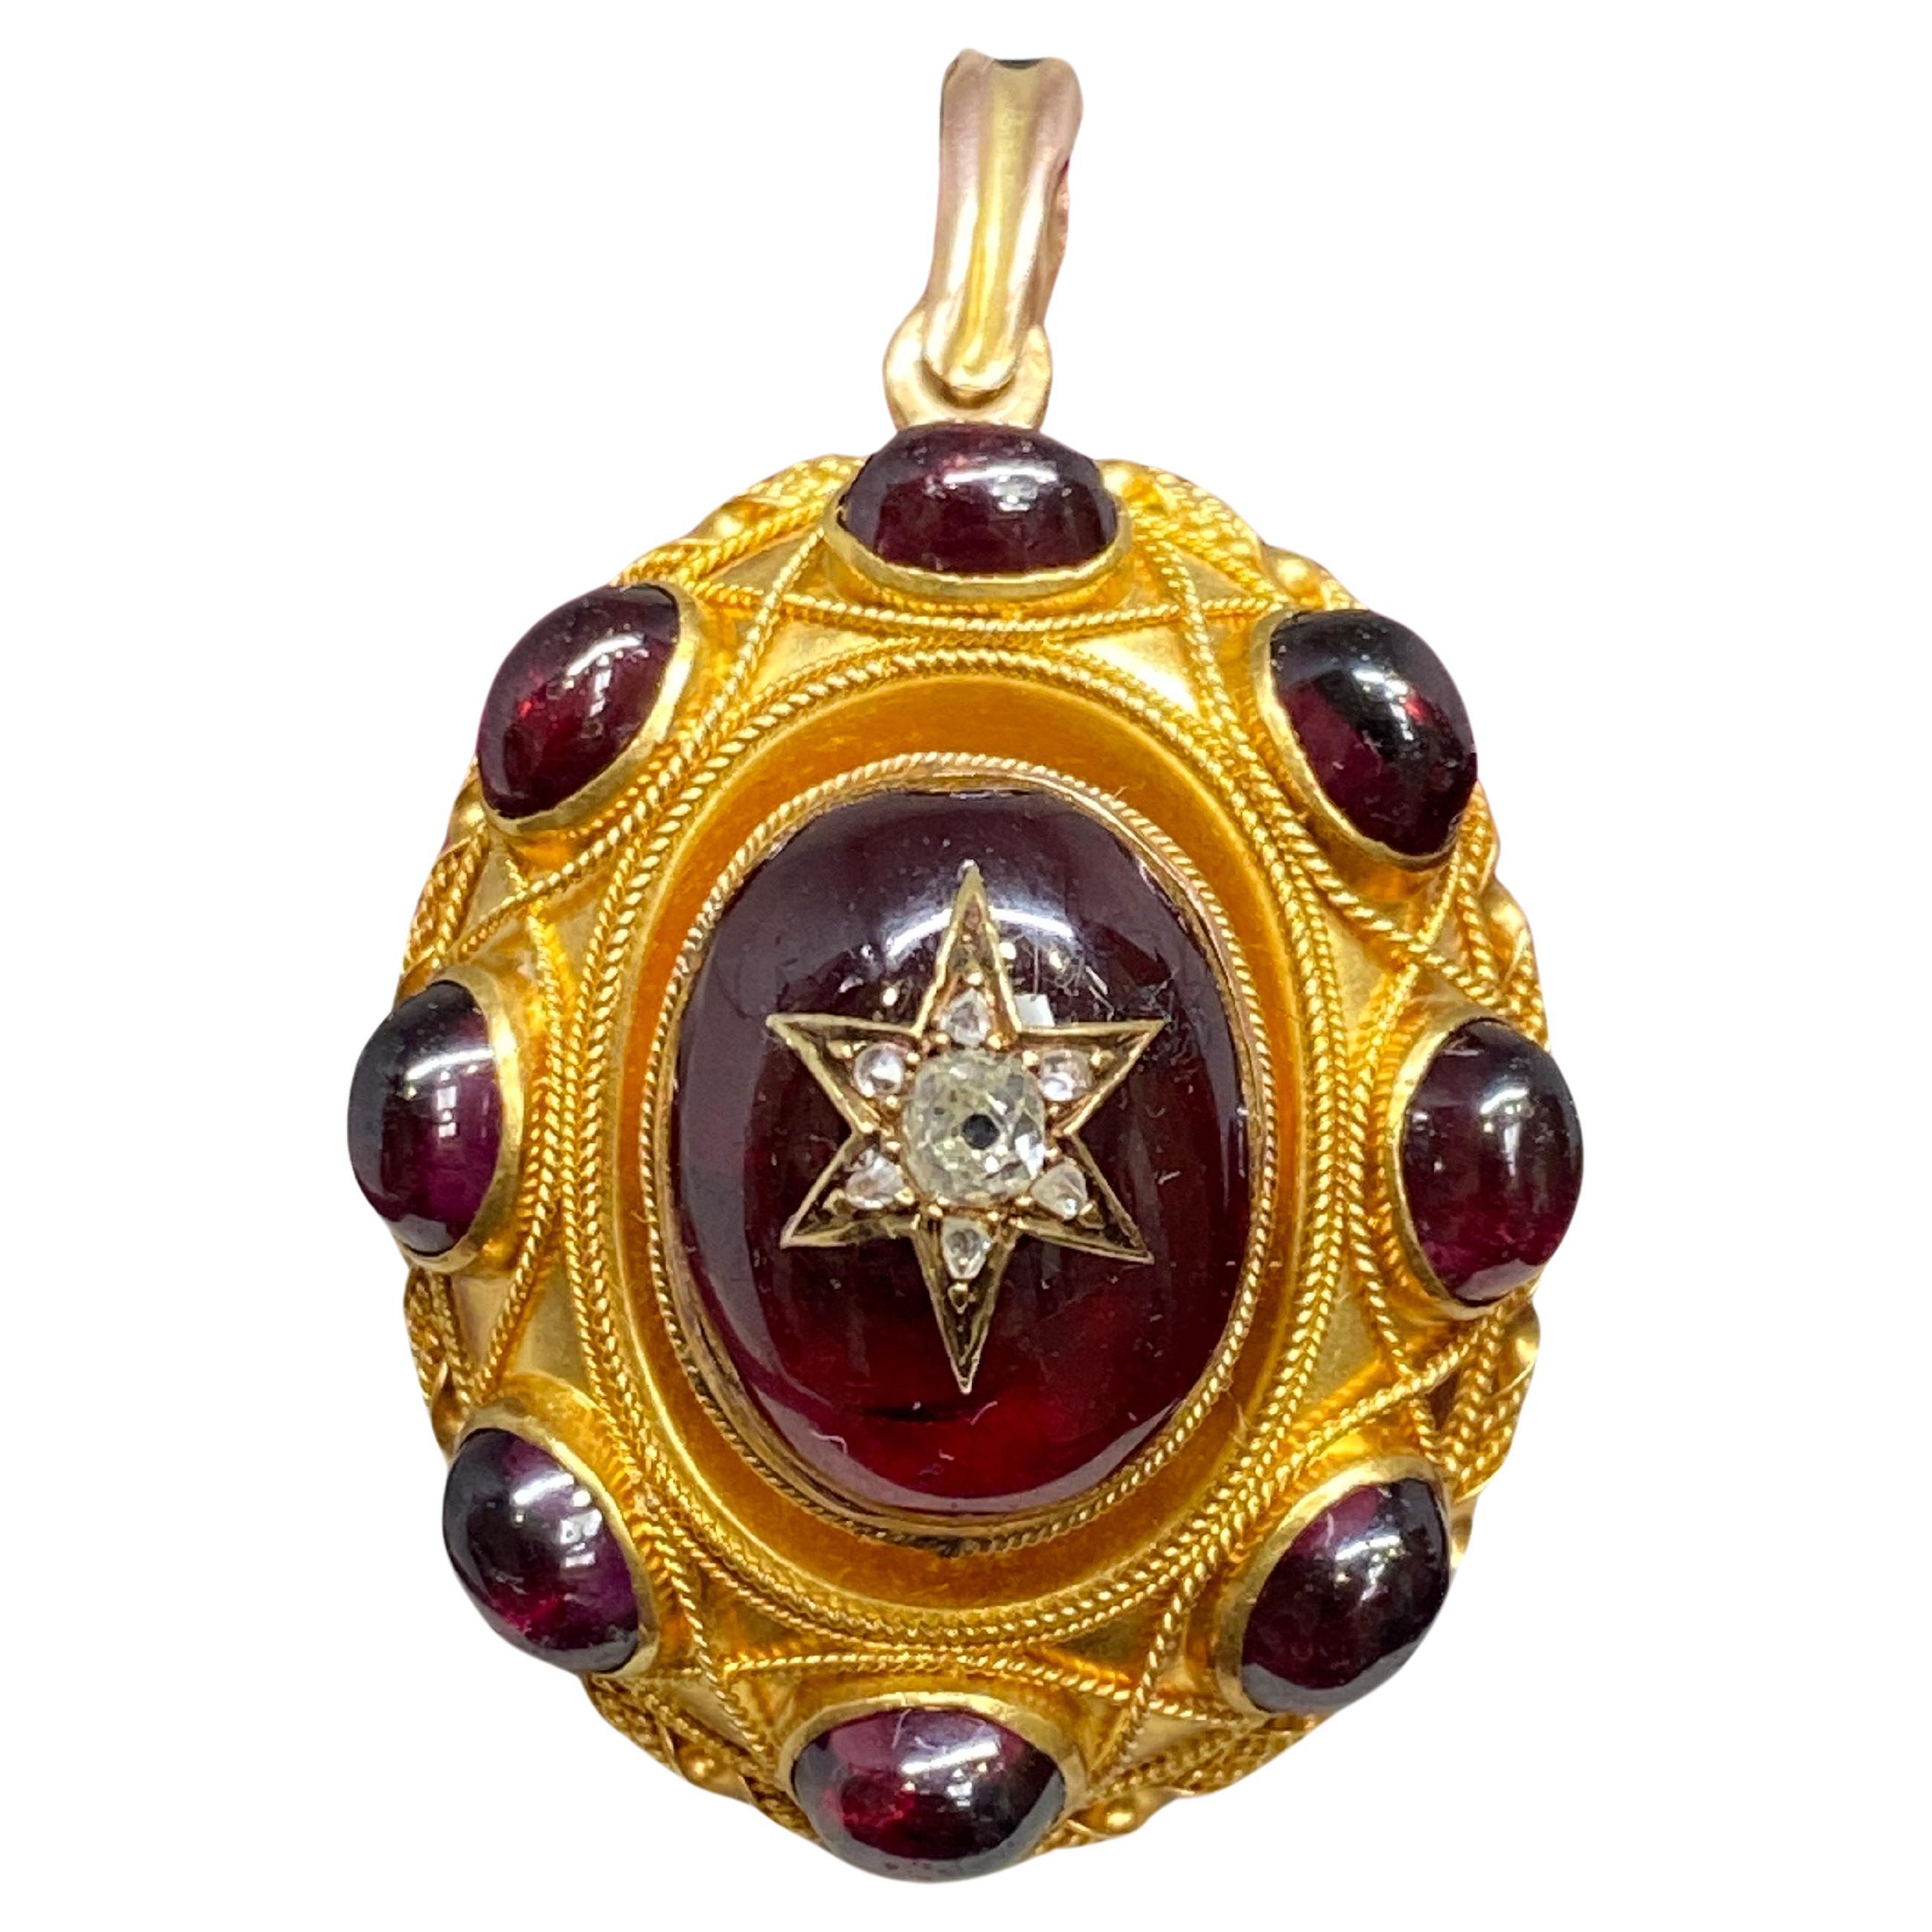 A gorgeous garnet and diamond locket pendant from the Victorian, circa 1870's era. This marvelous piece is crafted in vibrant 18kt yellow gold and features incredible 3-dimensional detail. At the center of the piece is a large, high domed